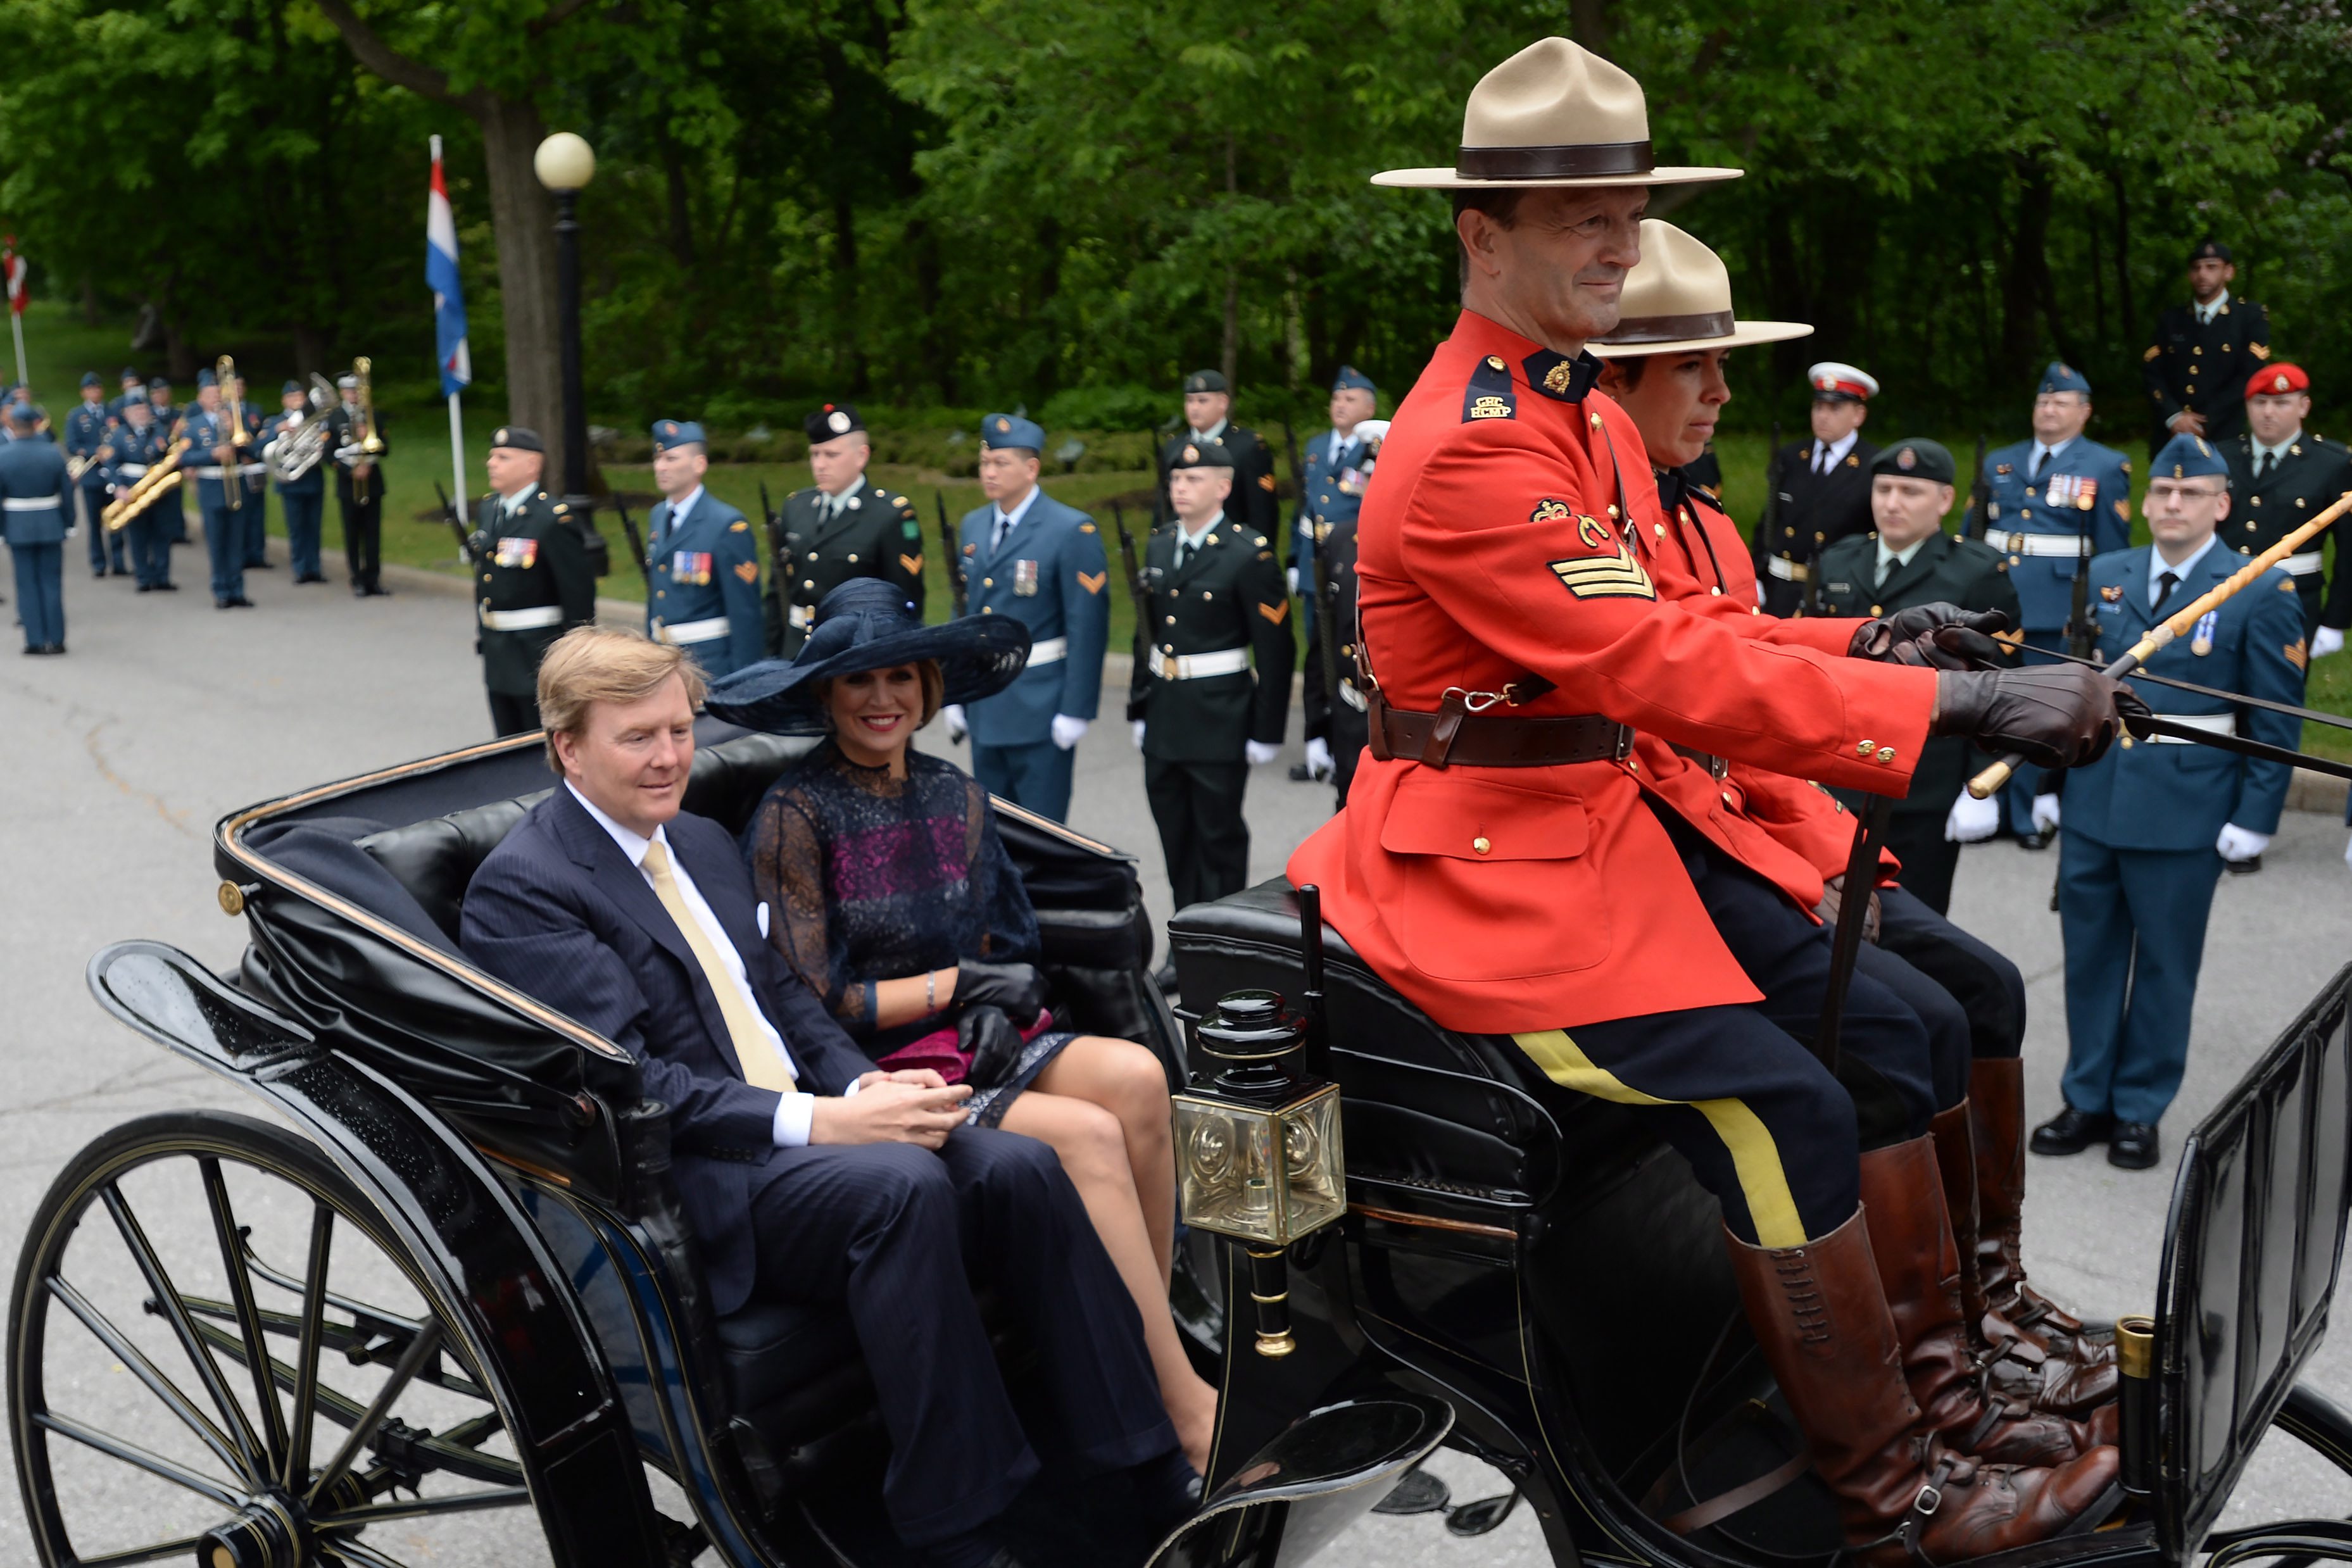 King Willem-Alexander and Queen Maxima of the Netherlands arrive at Rideau Hall in Ottawa on Wednesday, May 27, 2015.  (Sean Kilpatrick/The Canadian Press via AP) MANDATORY CREDIT